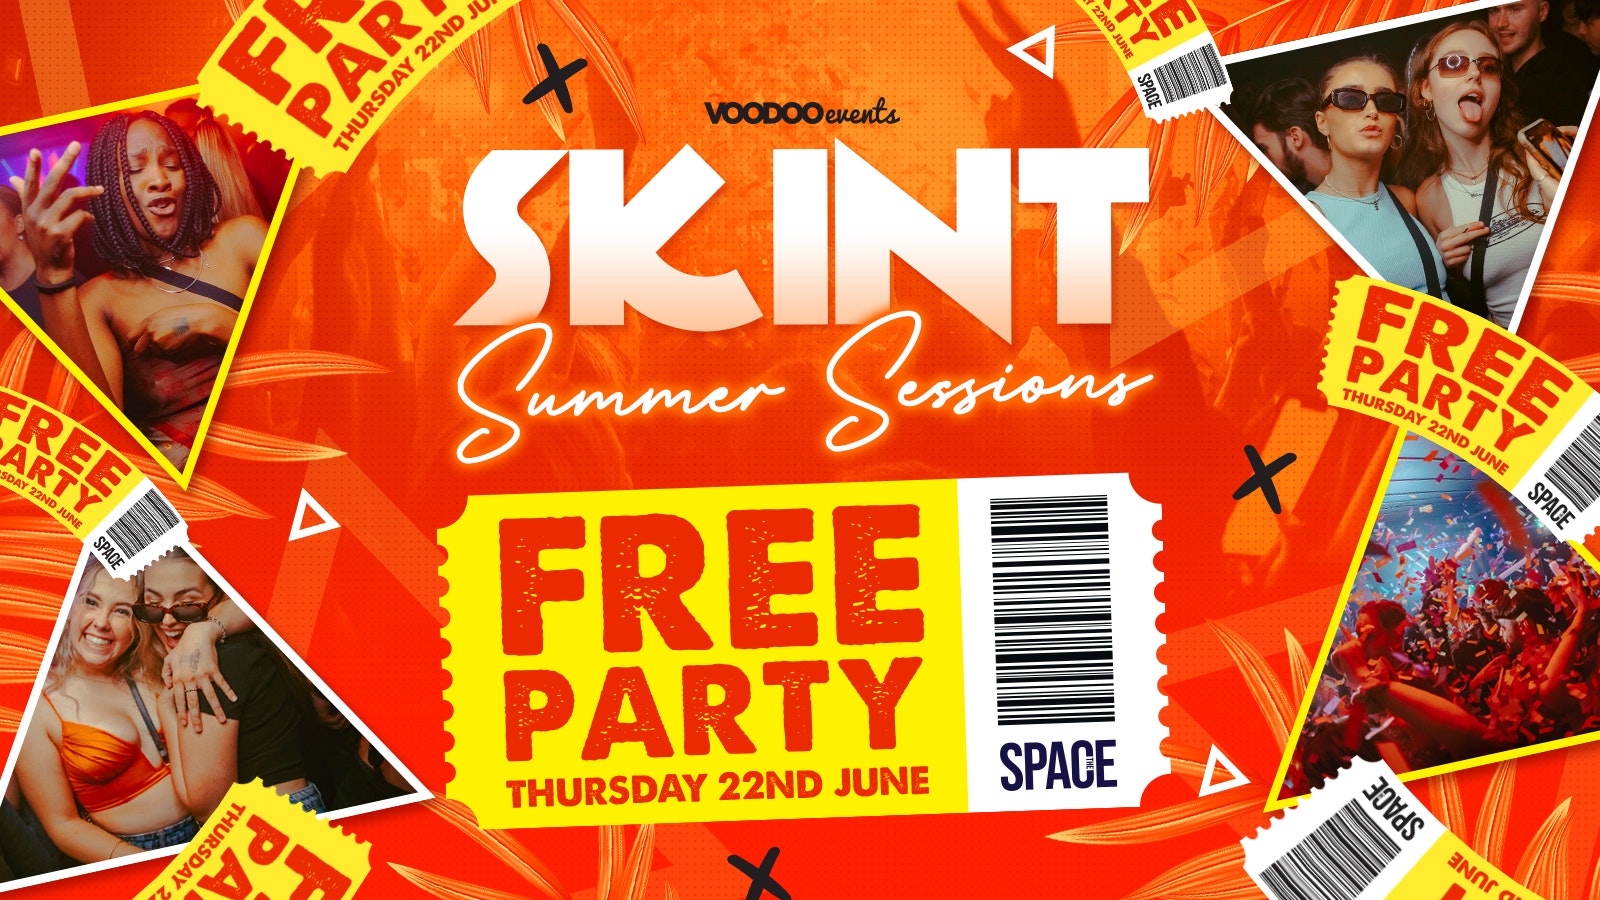 Skint Thursdays at Space Summer Sessions – 22nd June – Free Party